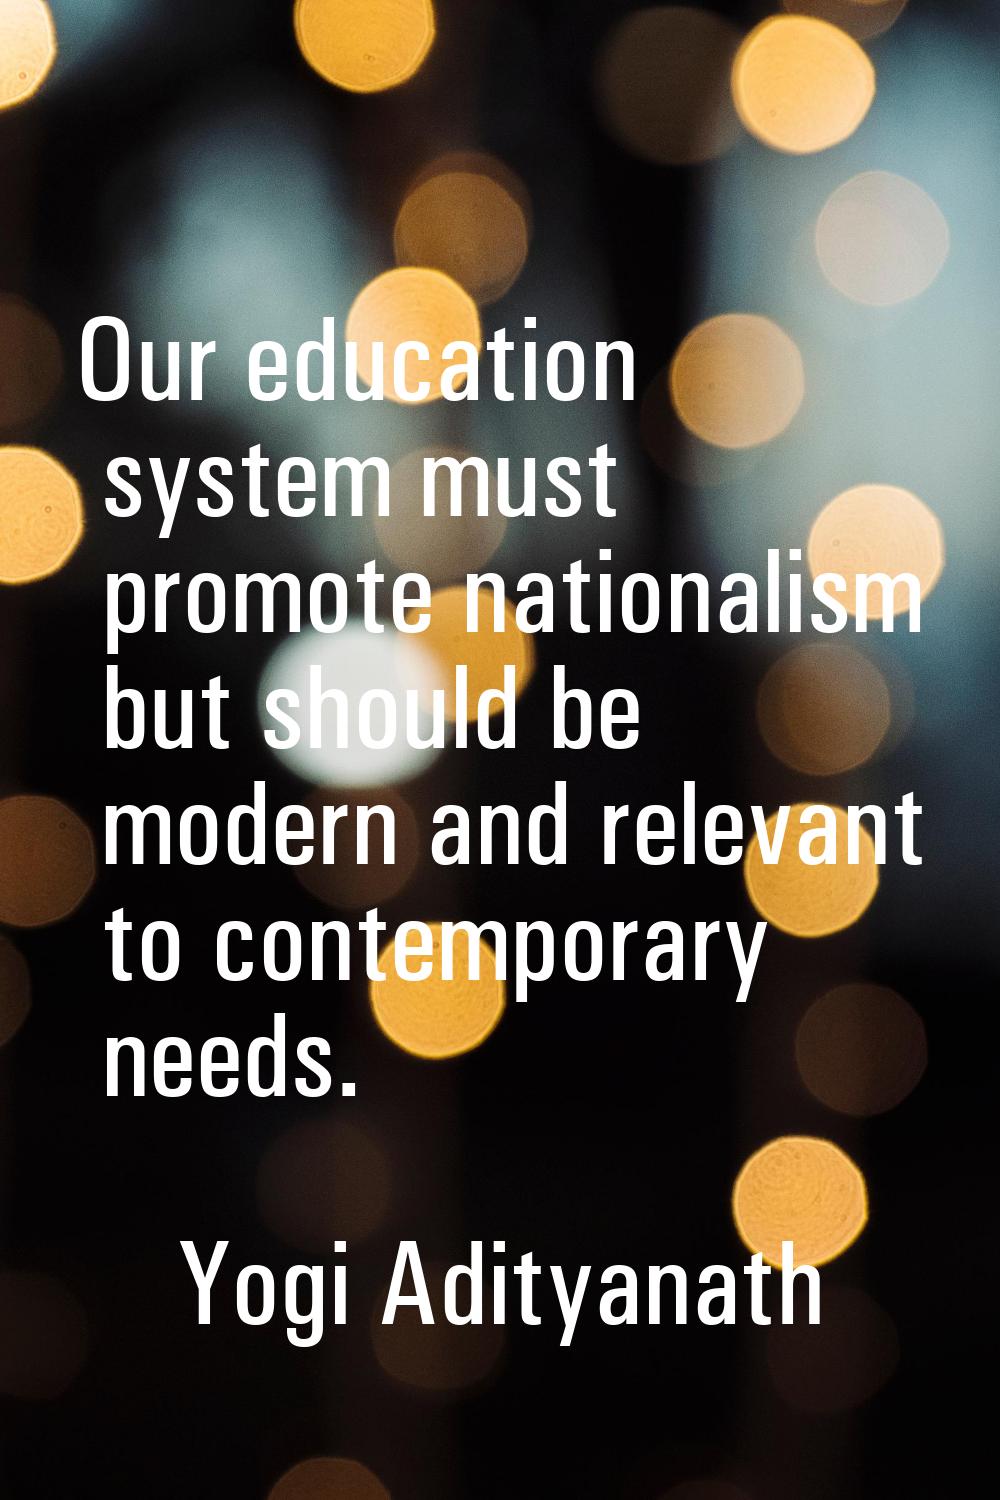 Our education system must promote nationalism but should be modern and relevant to contemporary nee